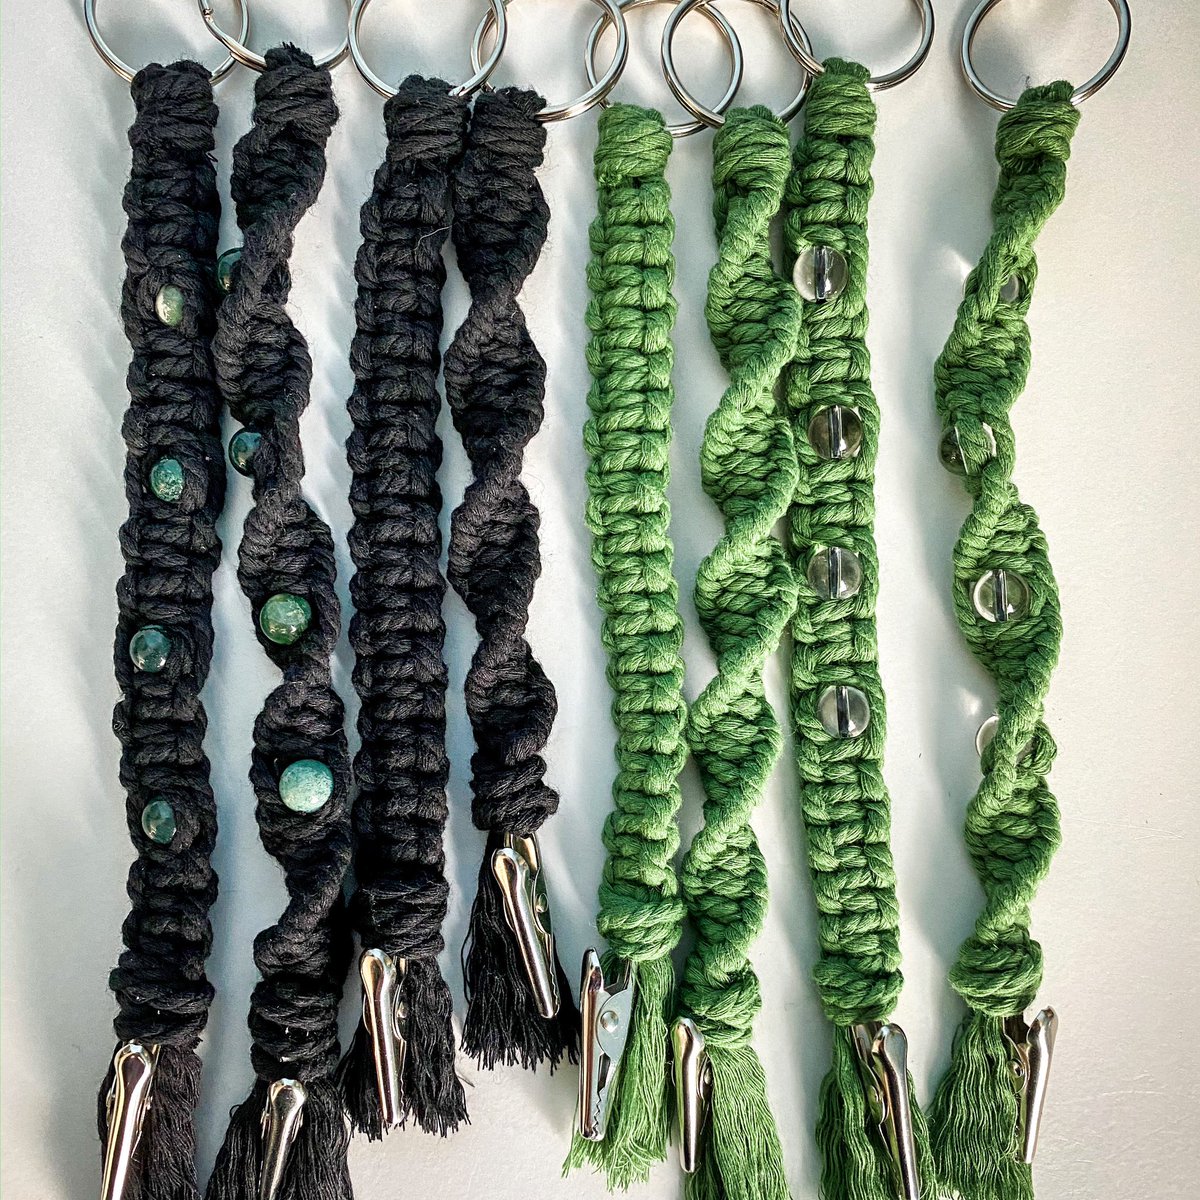 Macrame Keychains with Roach Clip, available here: etsy.com/shop/AlulaRai
#macrame #roachclip #mossagate #clearquartz #420allmonth #420friendly #420edition #macramecommunity #forsale #macramelove #keychain #macramekeychain